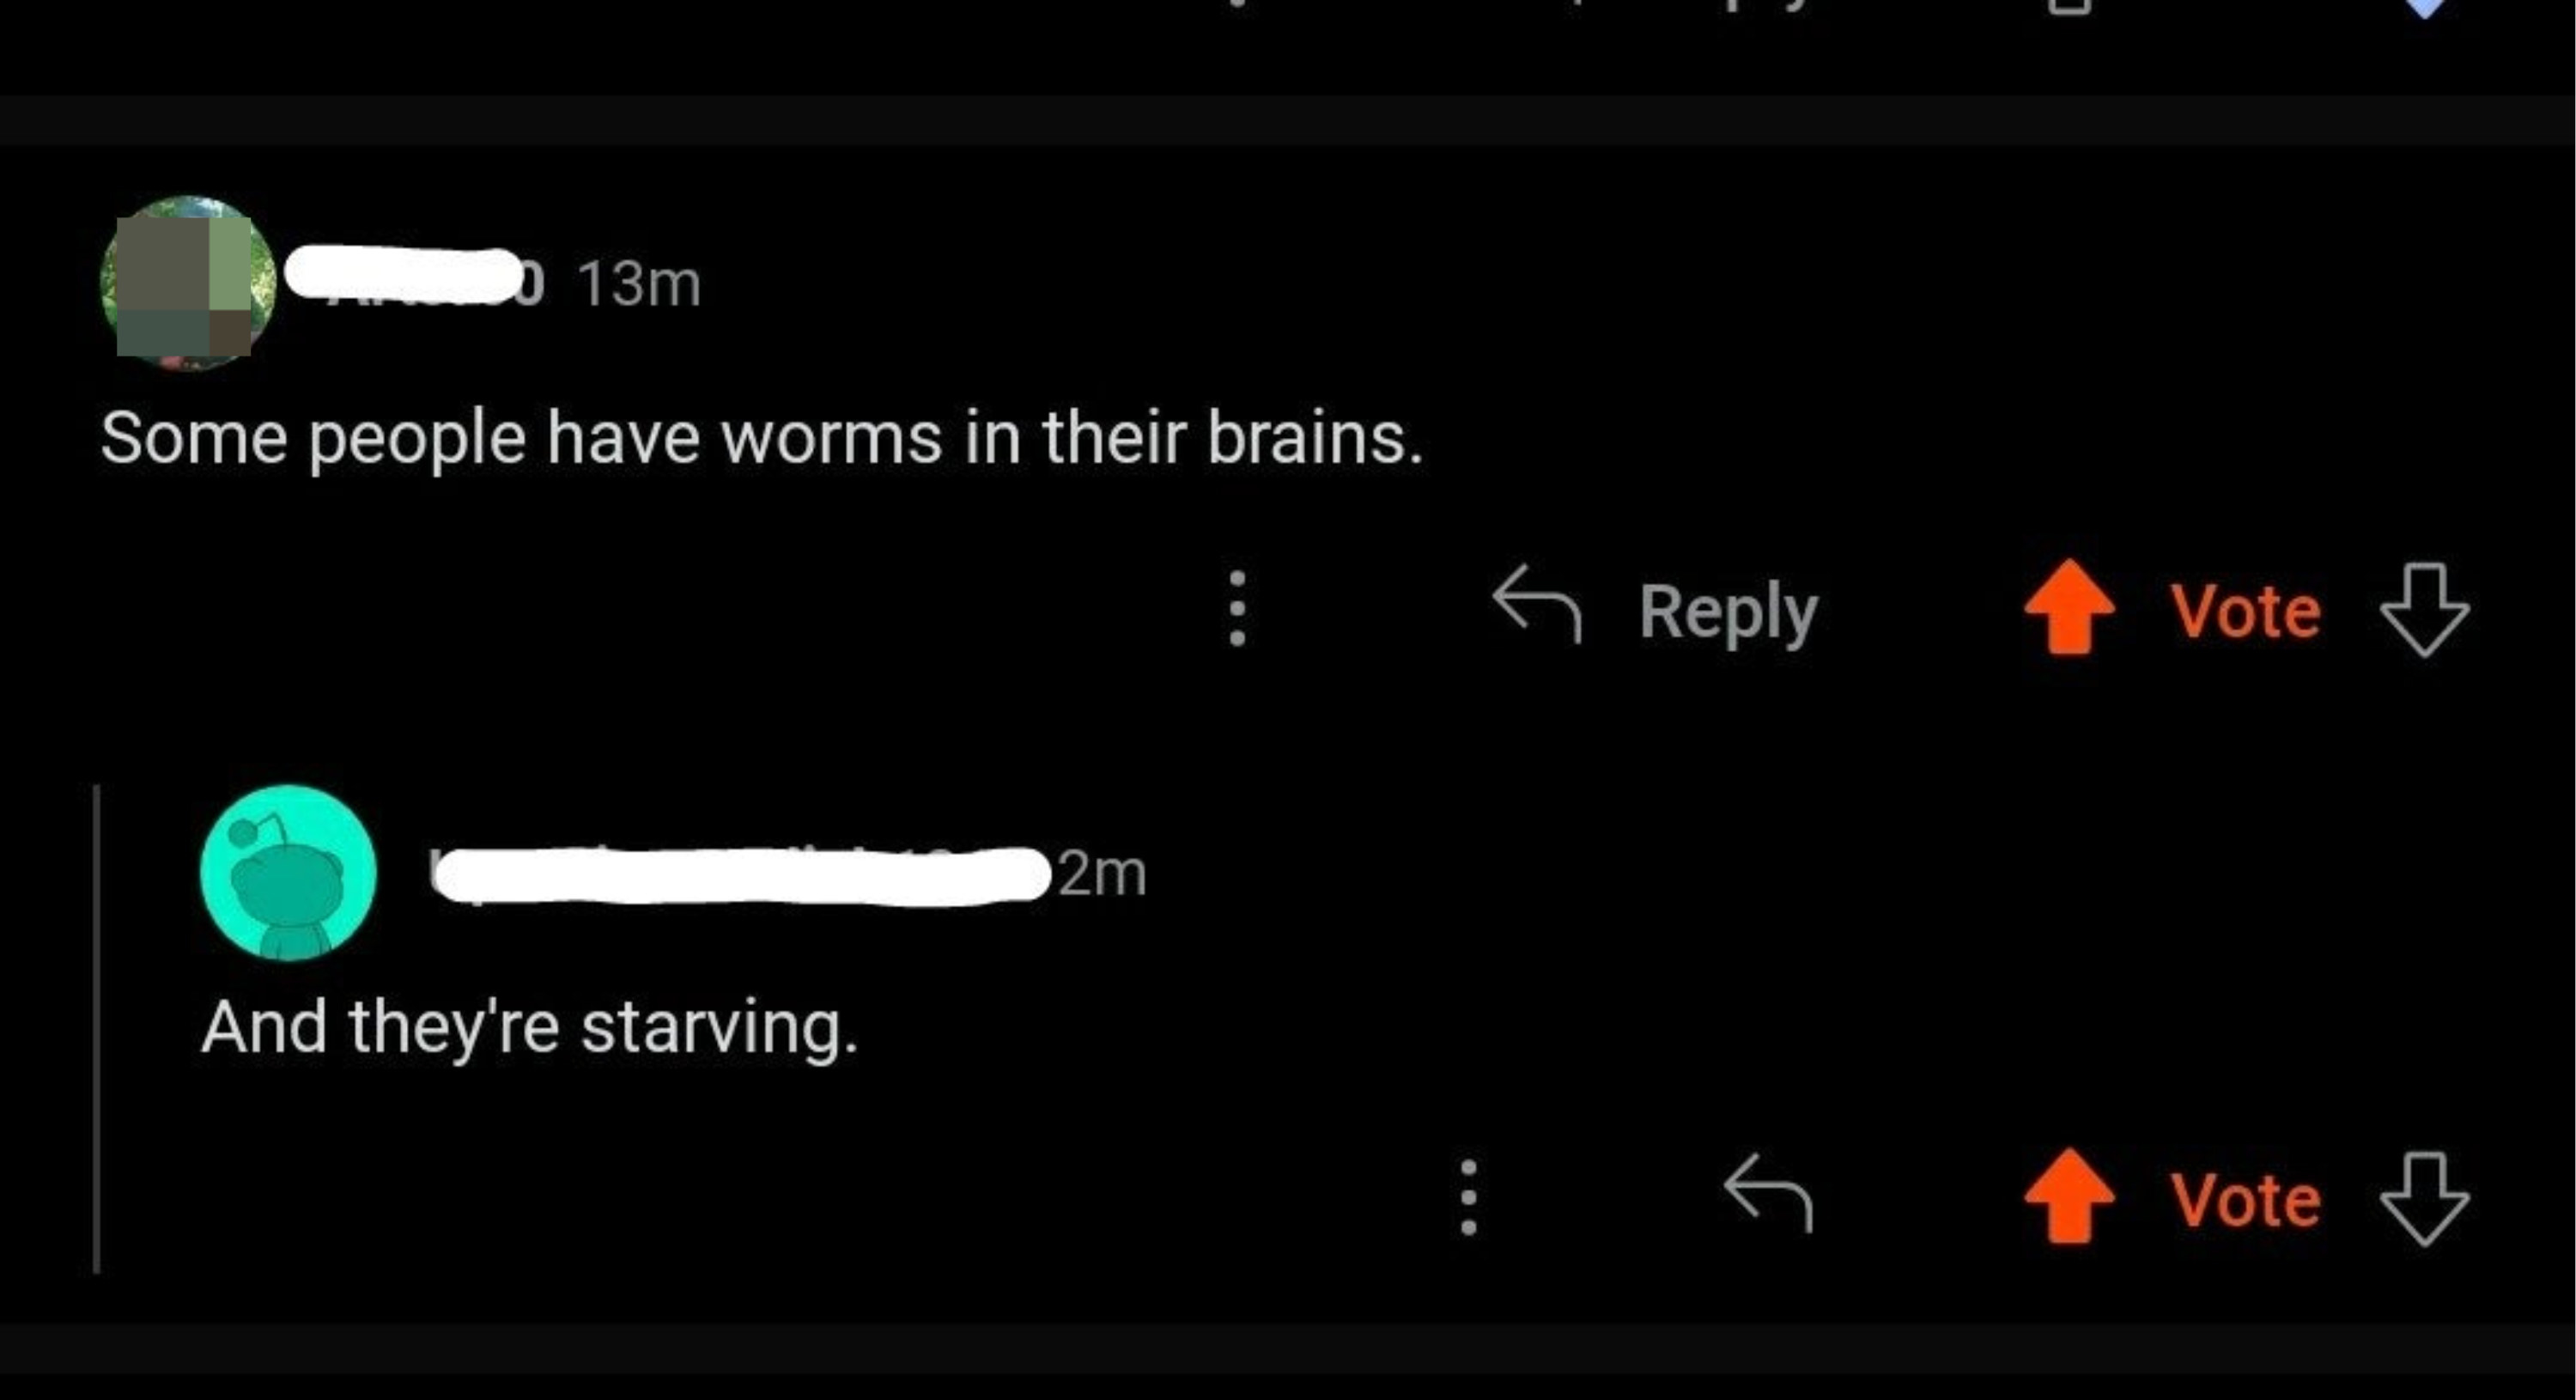 someone says some people have worms in their brains and they are starving